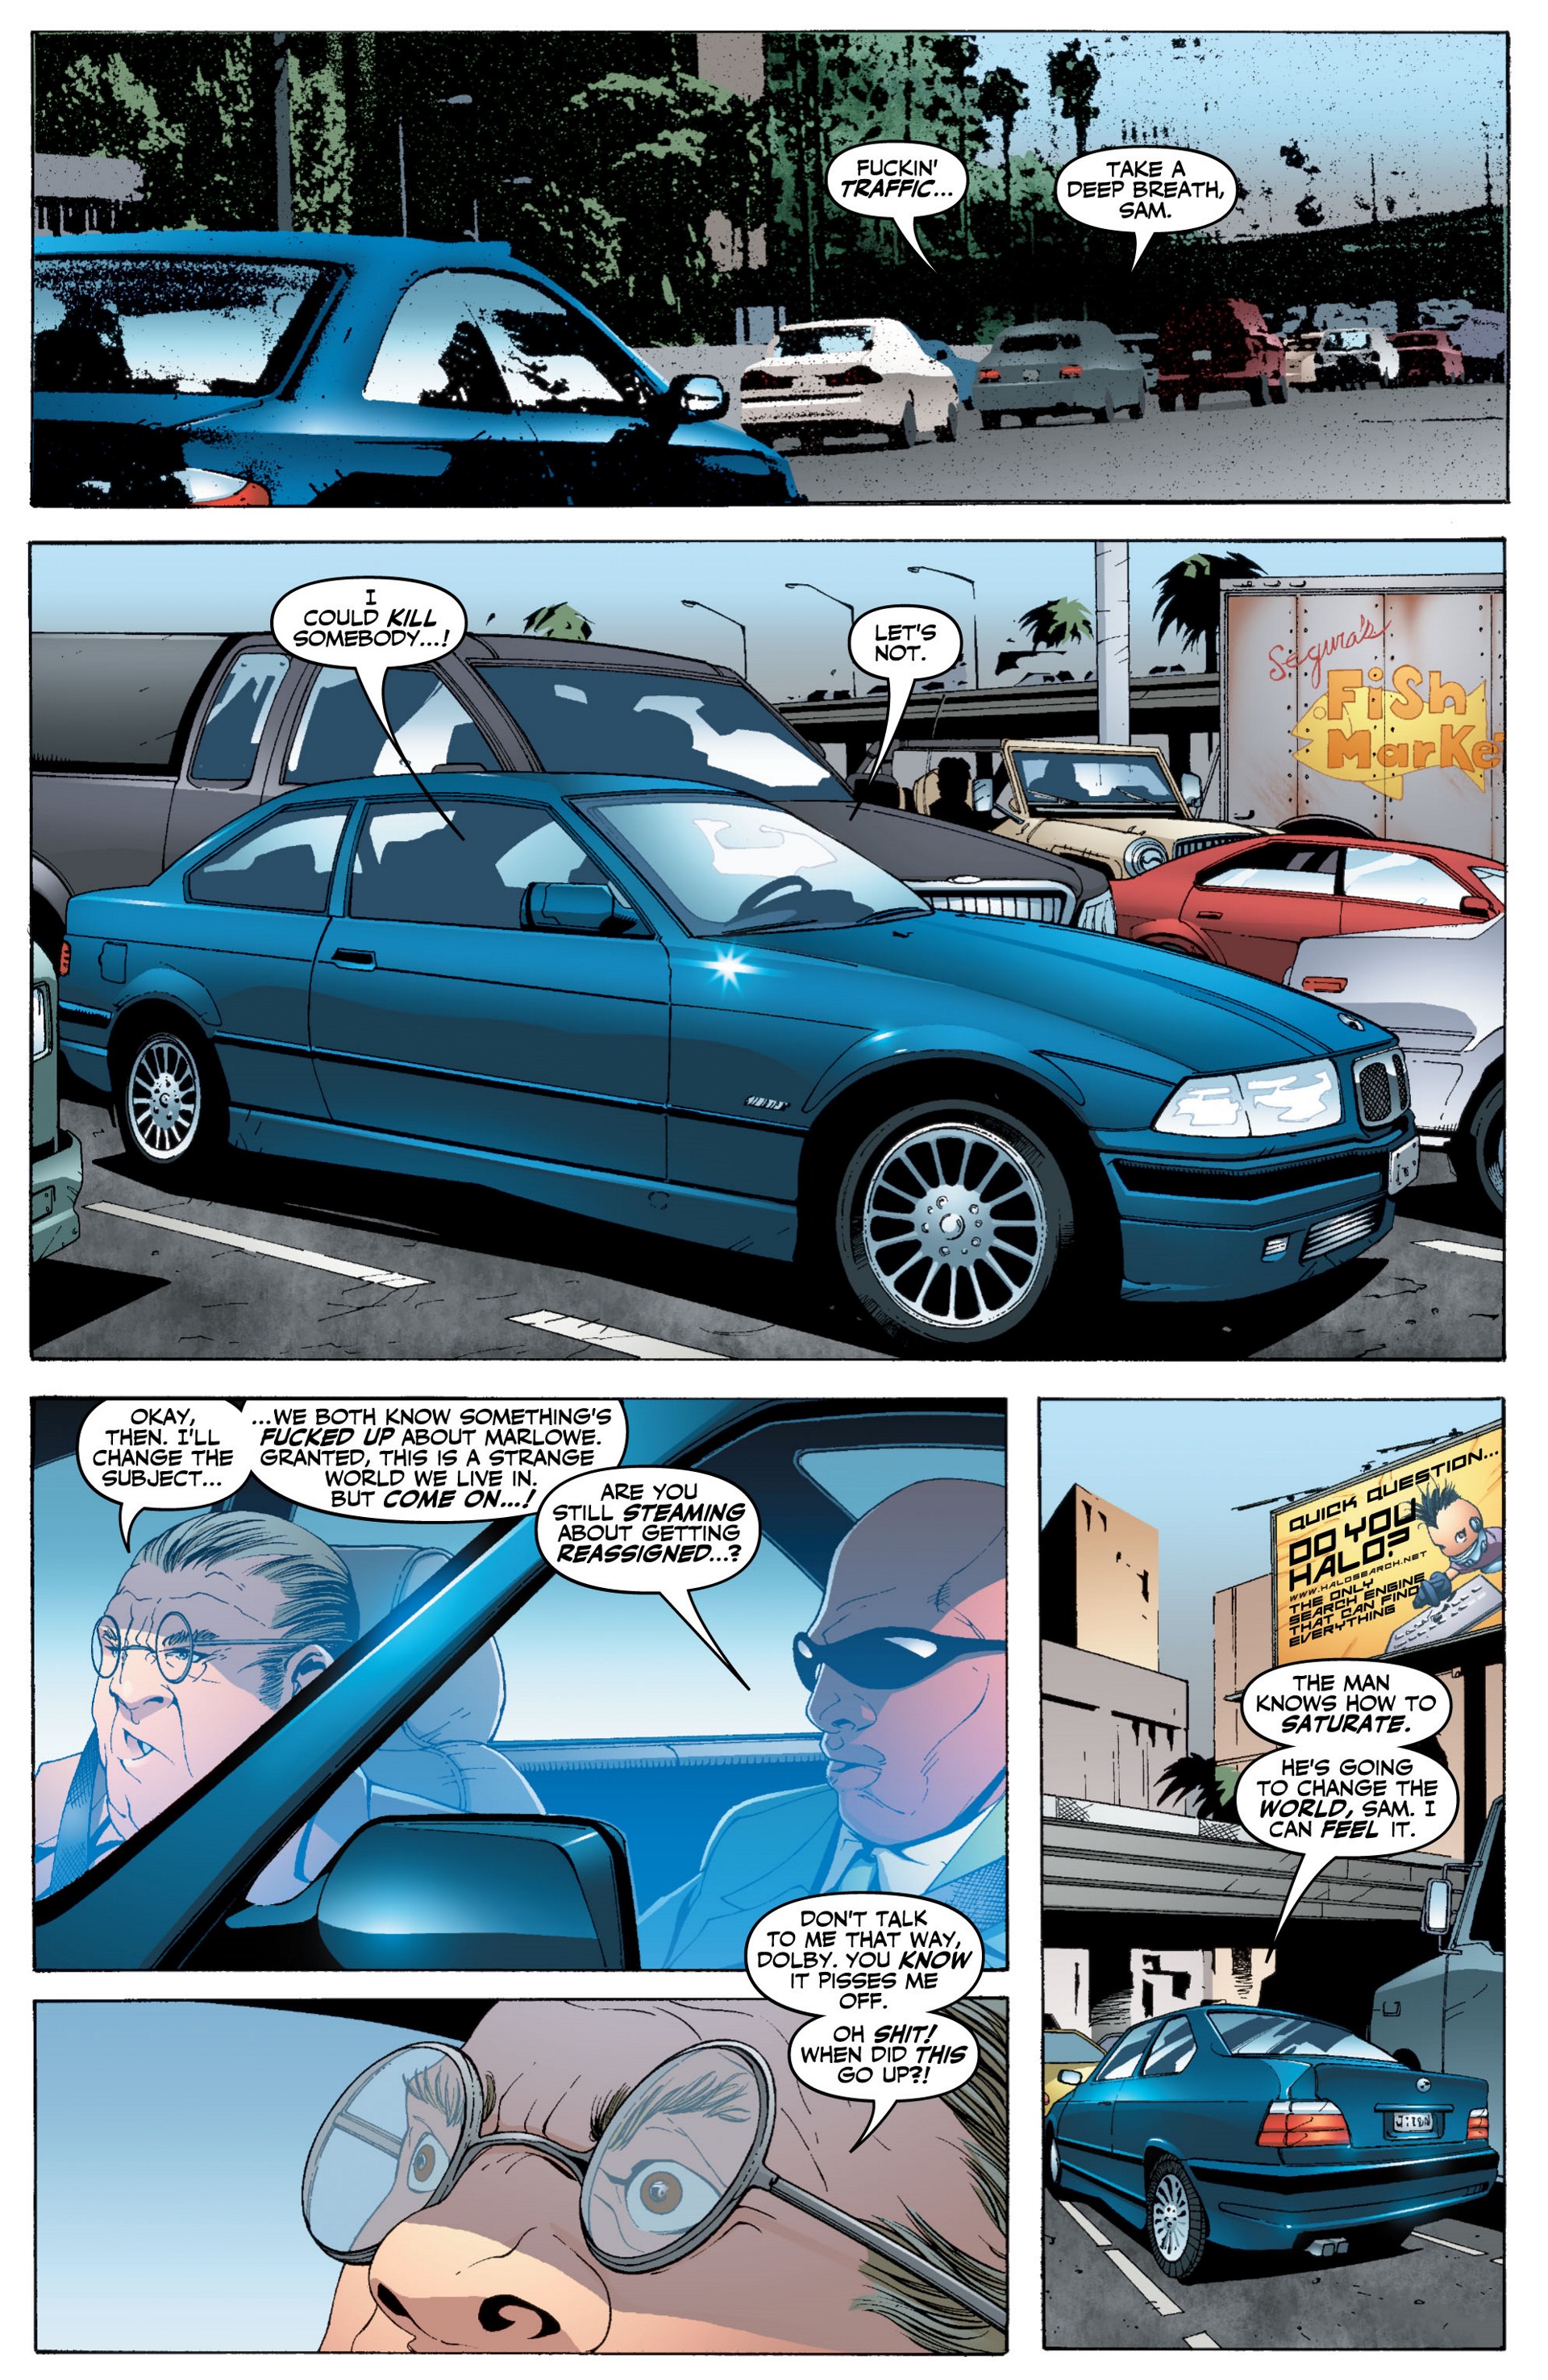 Wildcats Version 3.0 Issue #6 #6 - English 5